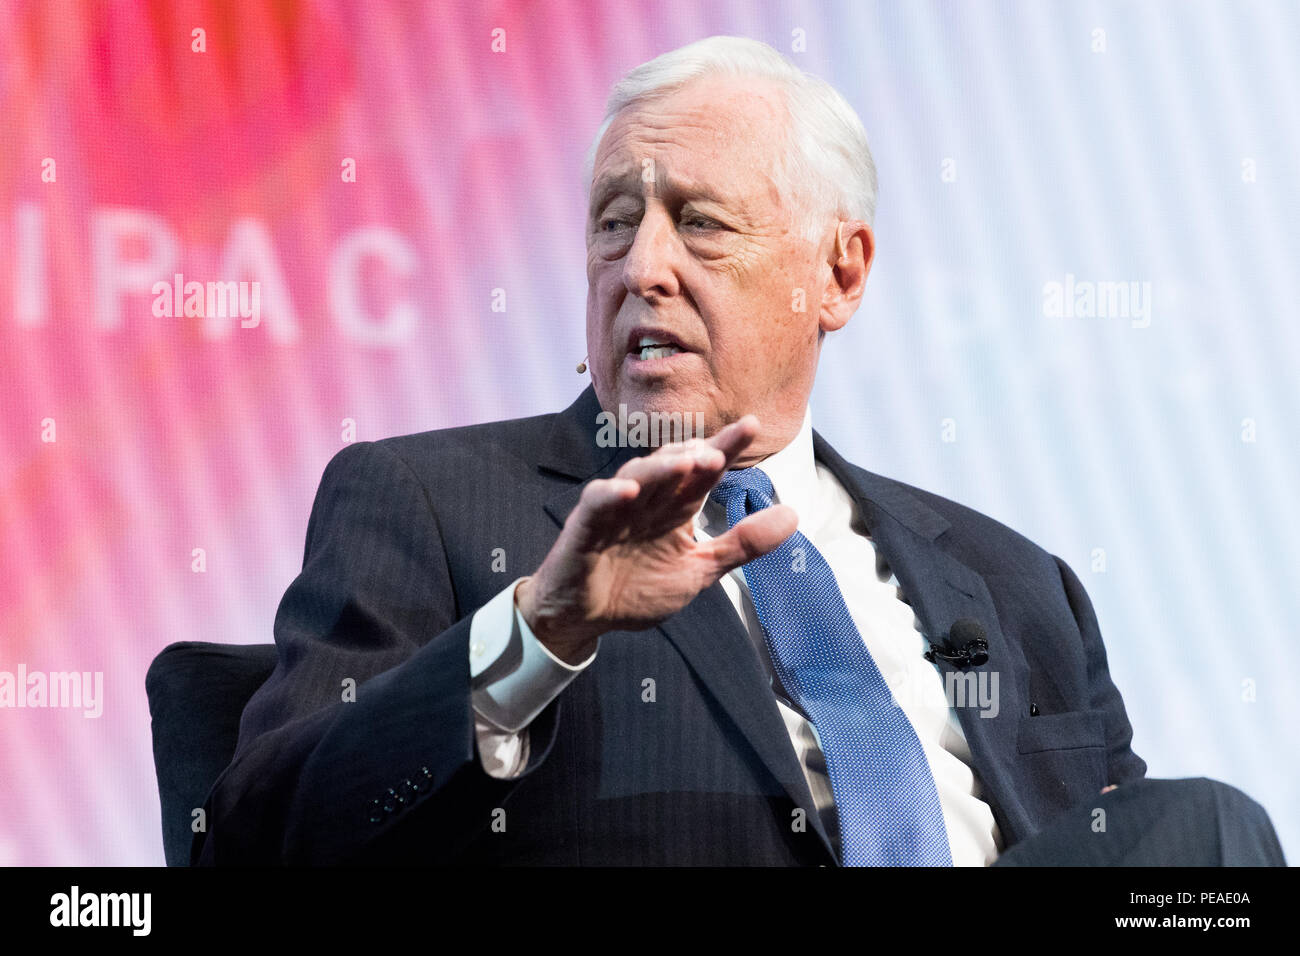 Steny Hoyer, Representative (D) for Maryland's 5th congressional district, speaking at the AIPAC (American Israel Public Affairs Committee) Policy Con Stock Photo